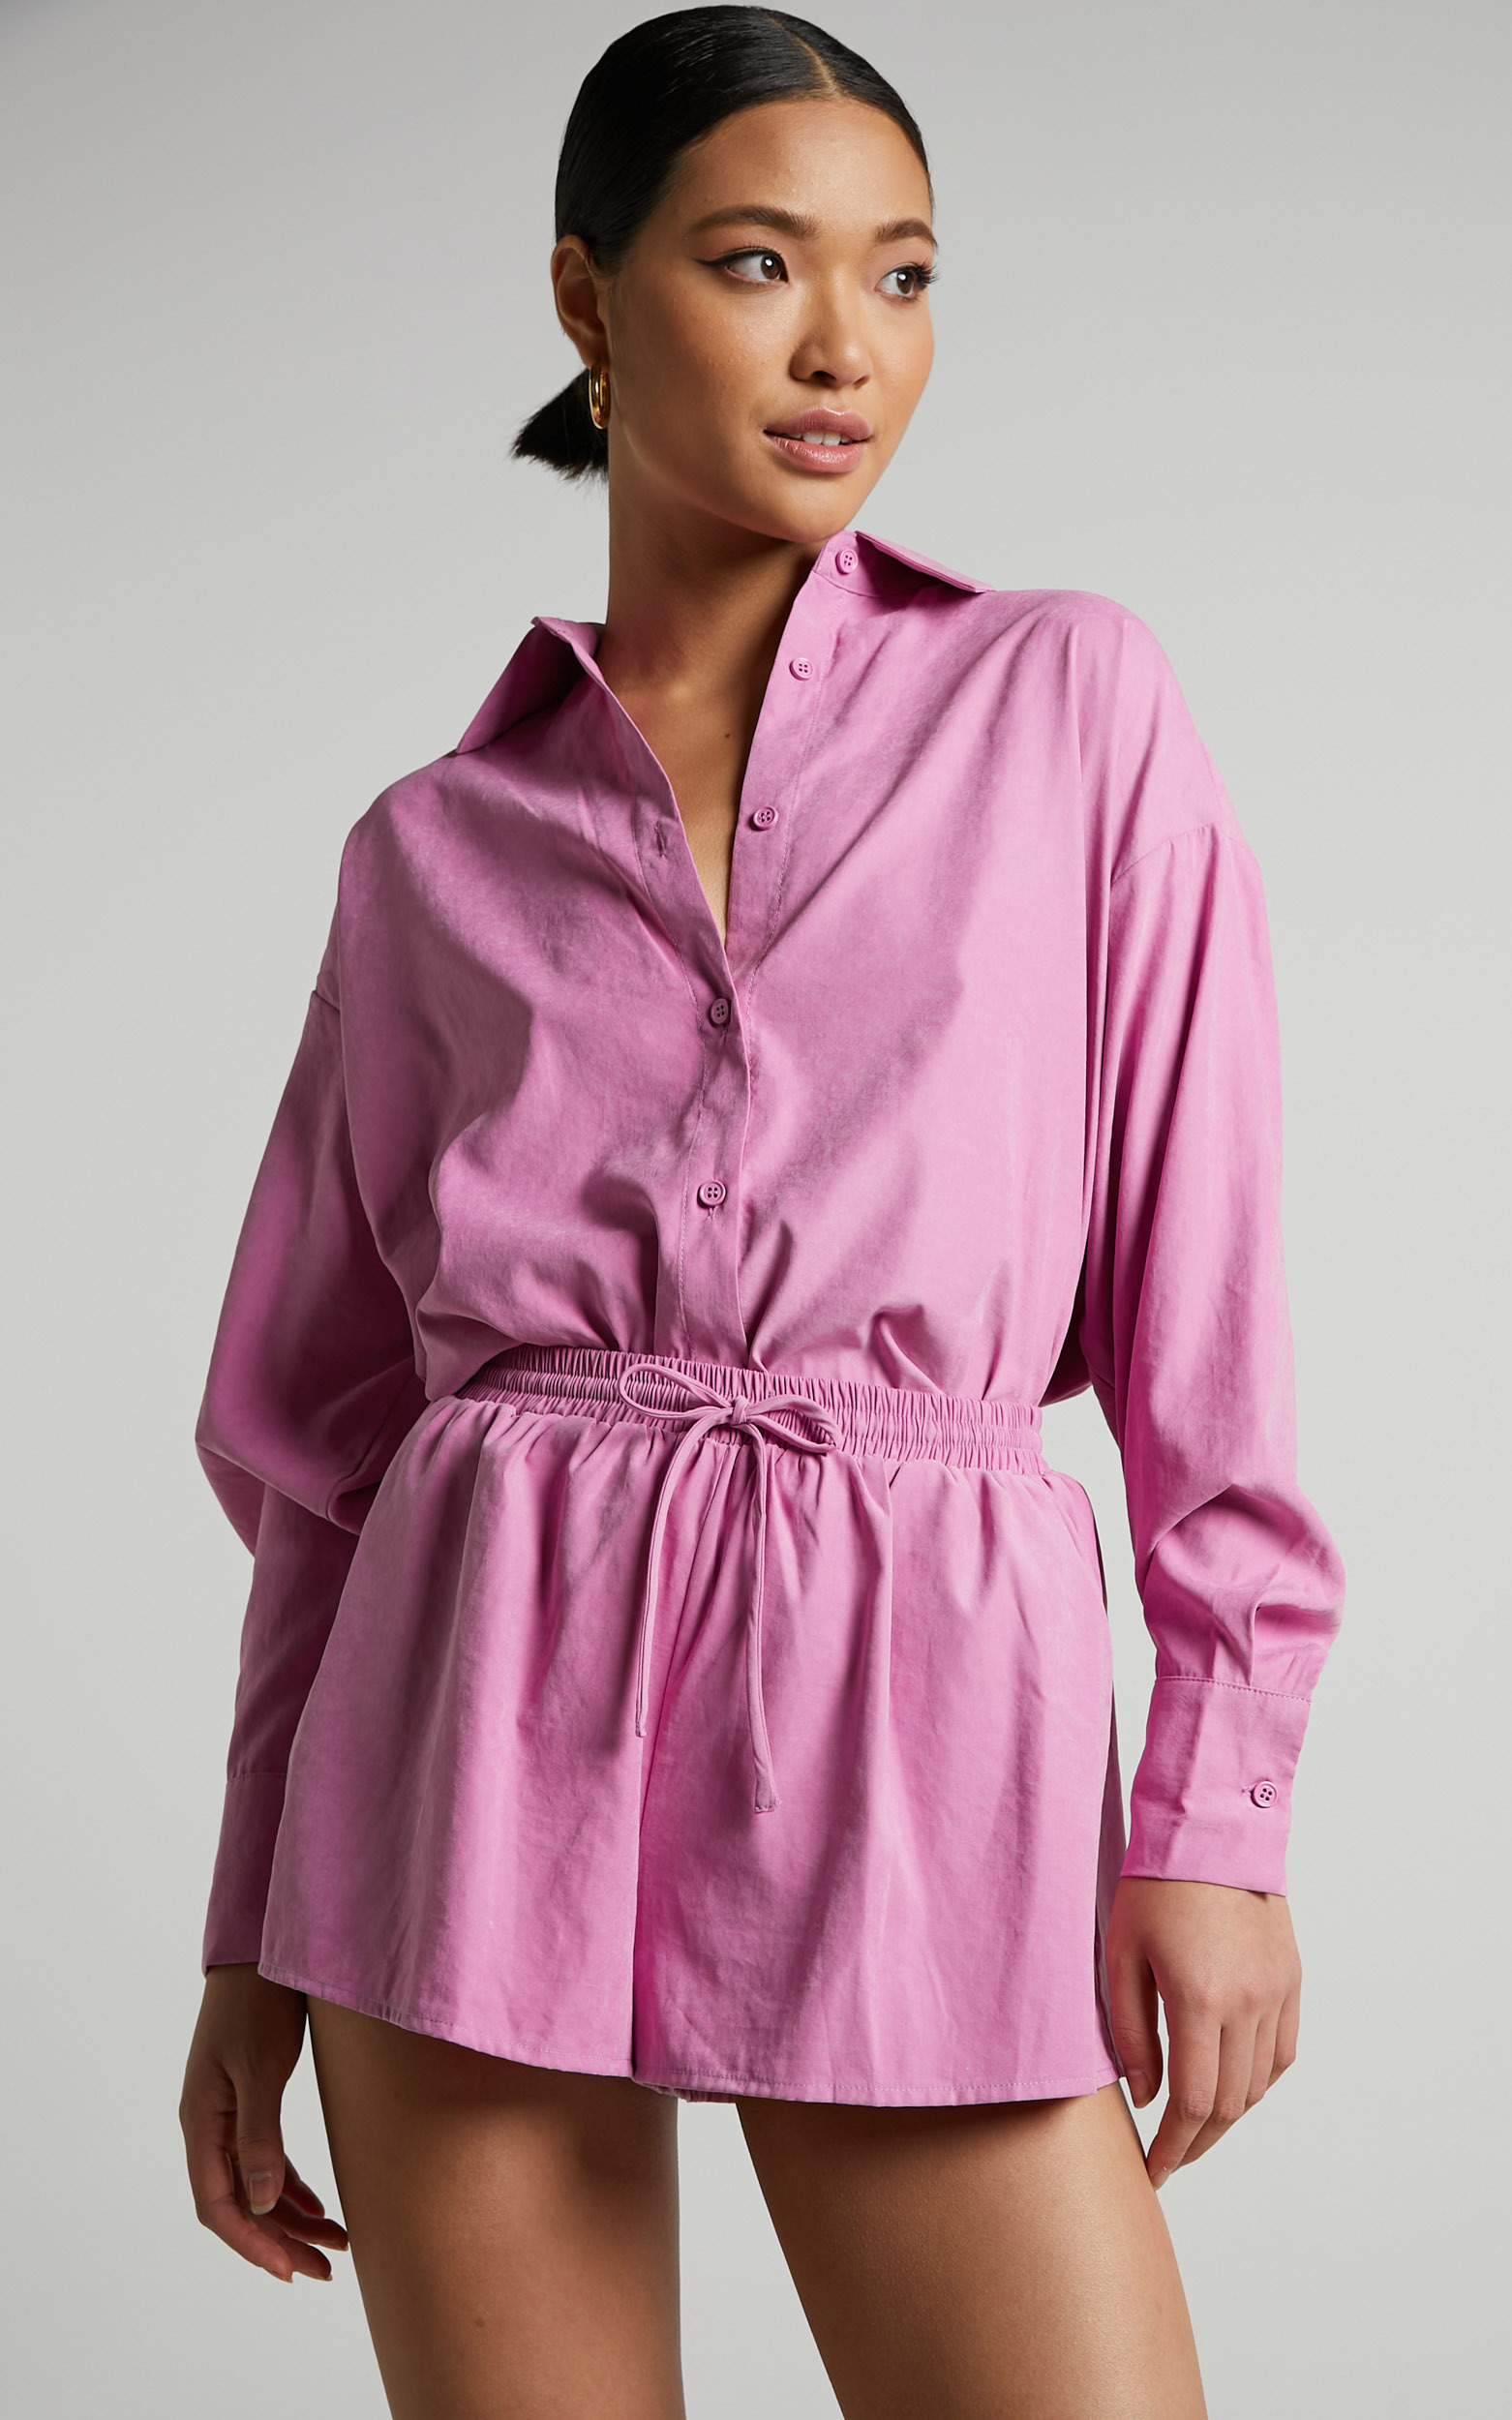 Niobe Shirt - Relaxed Button Up Long Sleeve Shirt in Pink - 04, PNK1, hi-res image number null